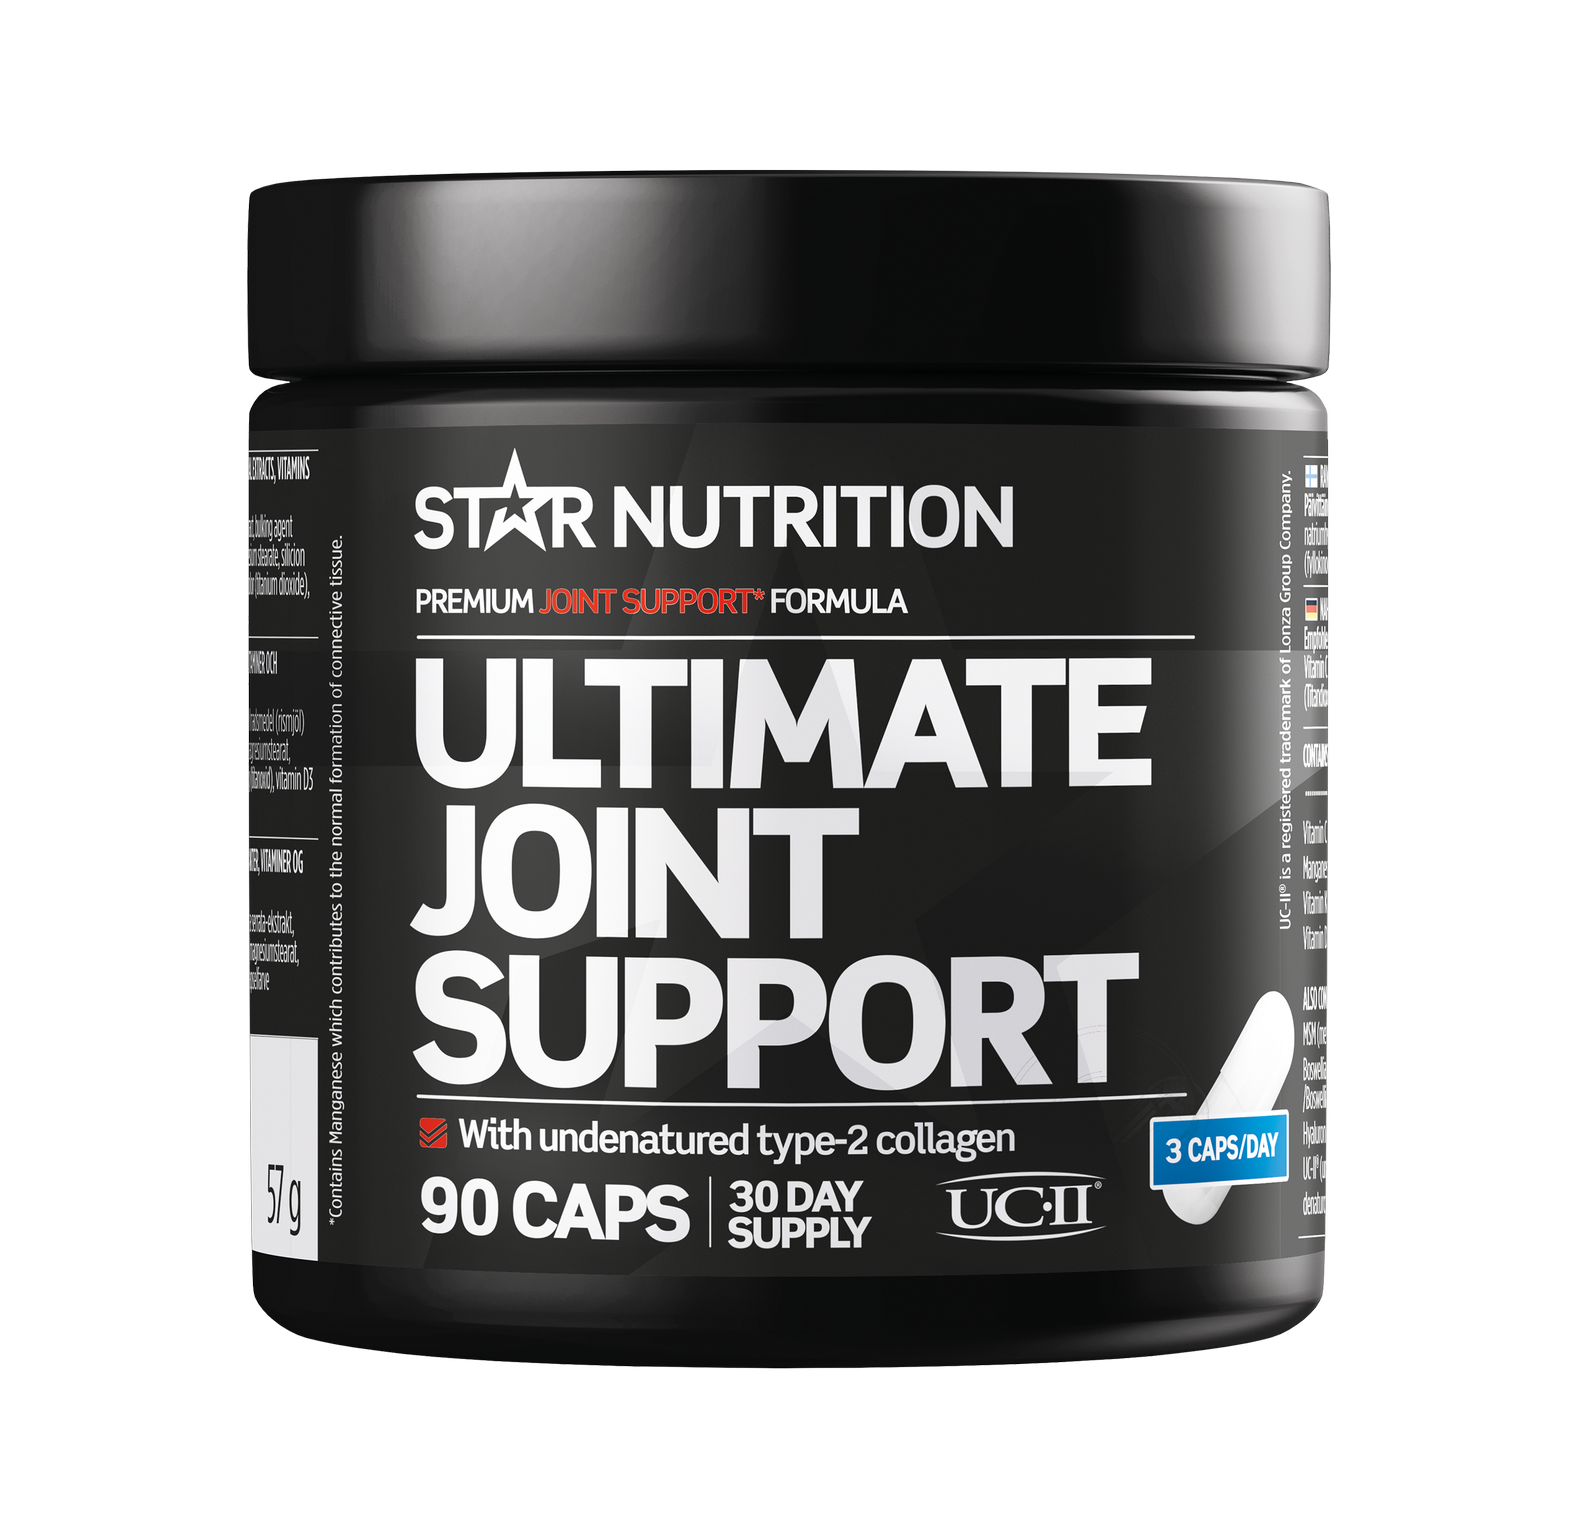 Star Nutrition Ultimate Joint Support 90 caps